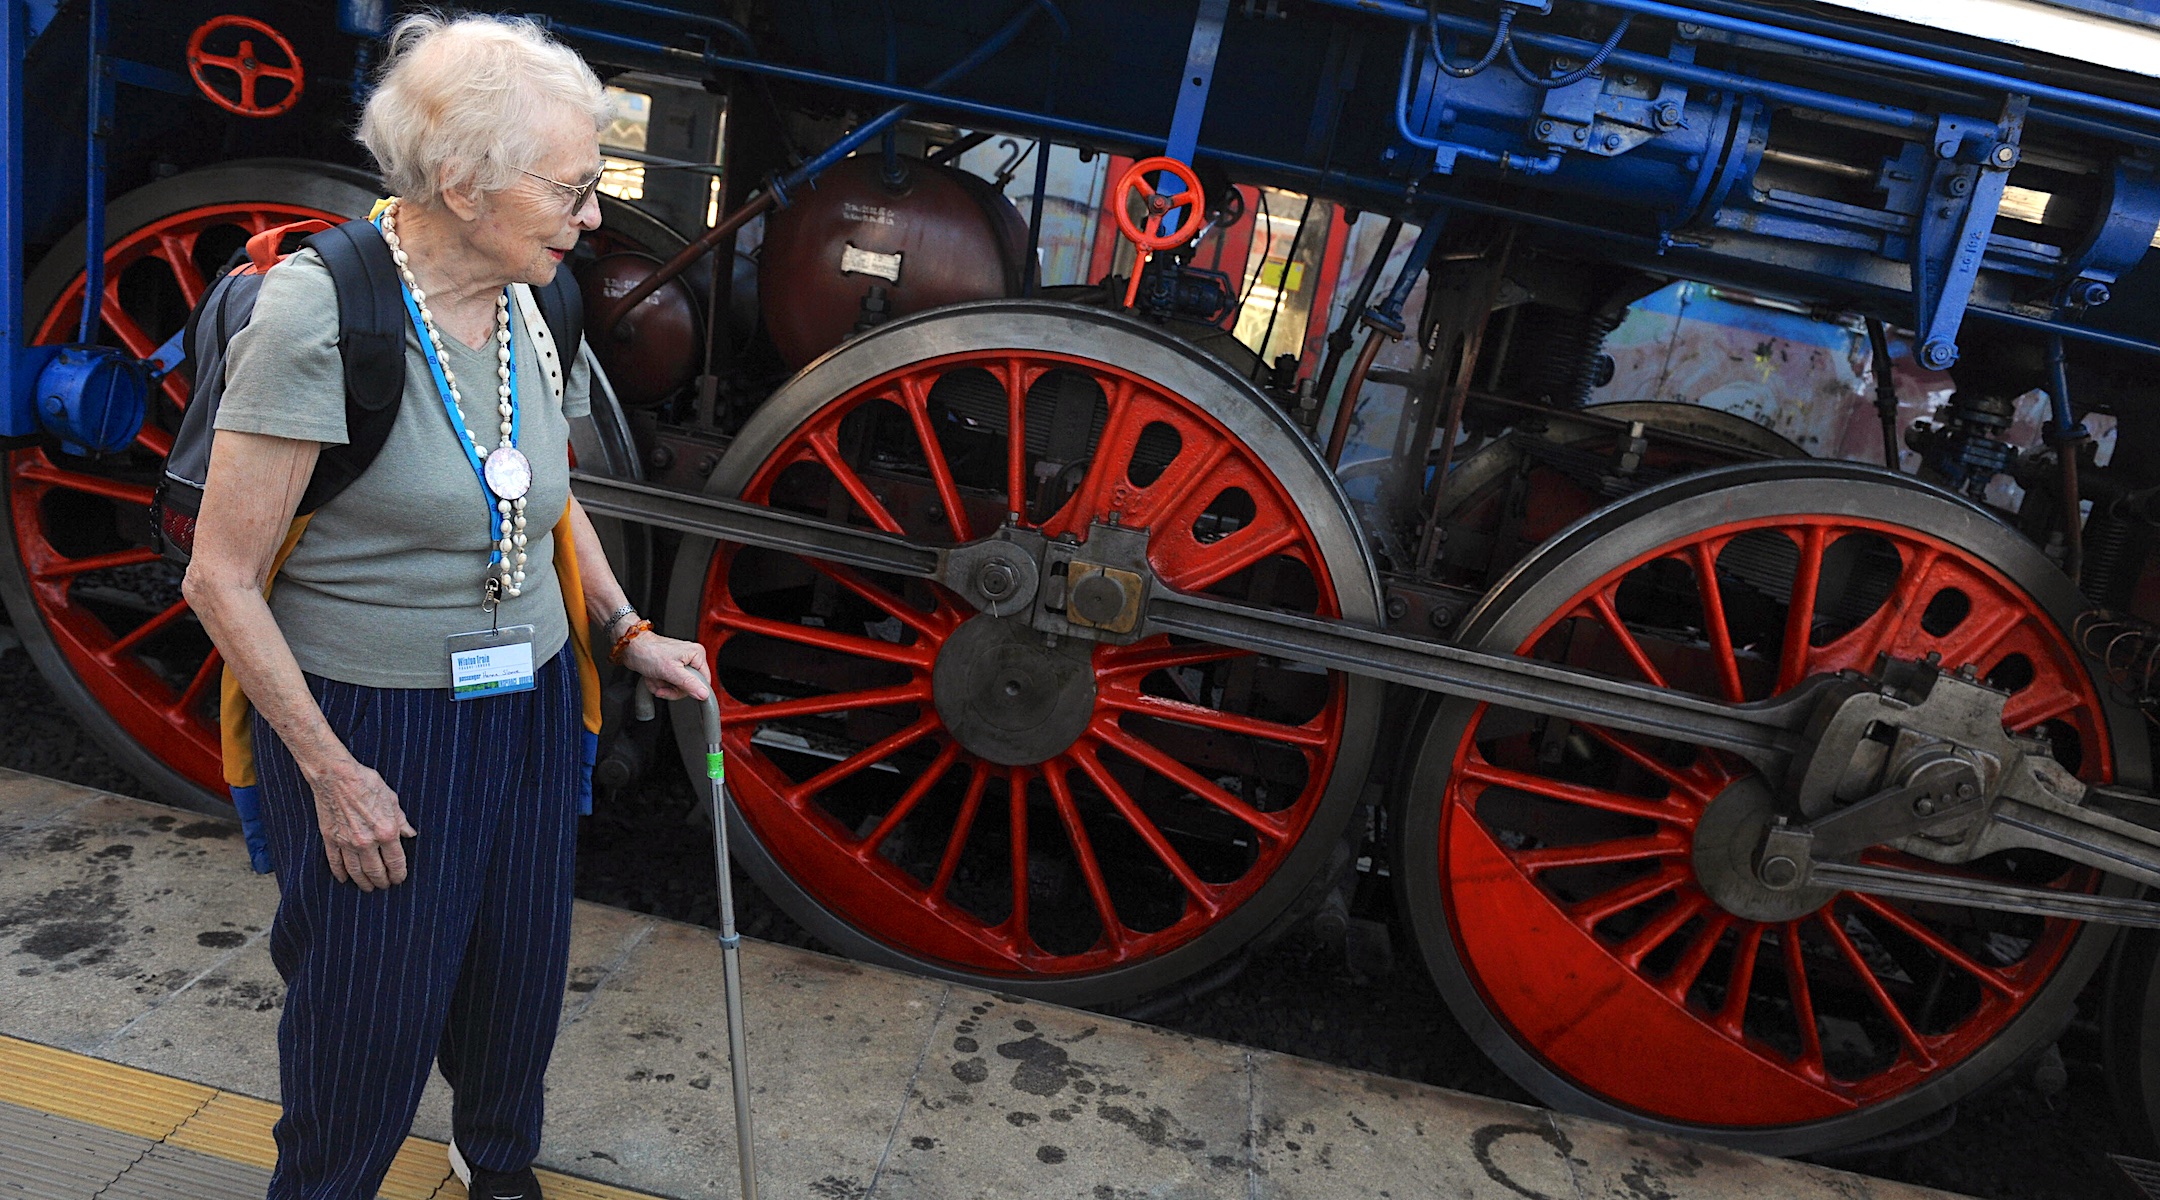 Survivor Hanna Slome looks at a historical train in Prague named ”Winton” after the British stockbroker who helped save her and 668 other children during the Holocaust on Sept. 1, 1999. (AFP Phto/Michal Cozen via Getty Images)